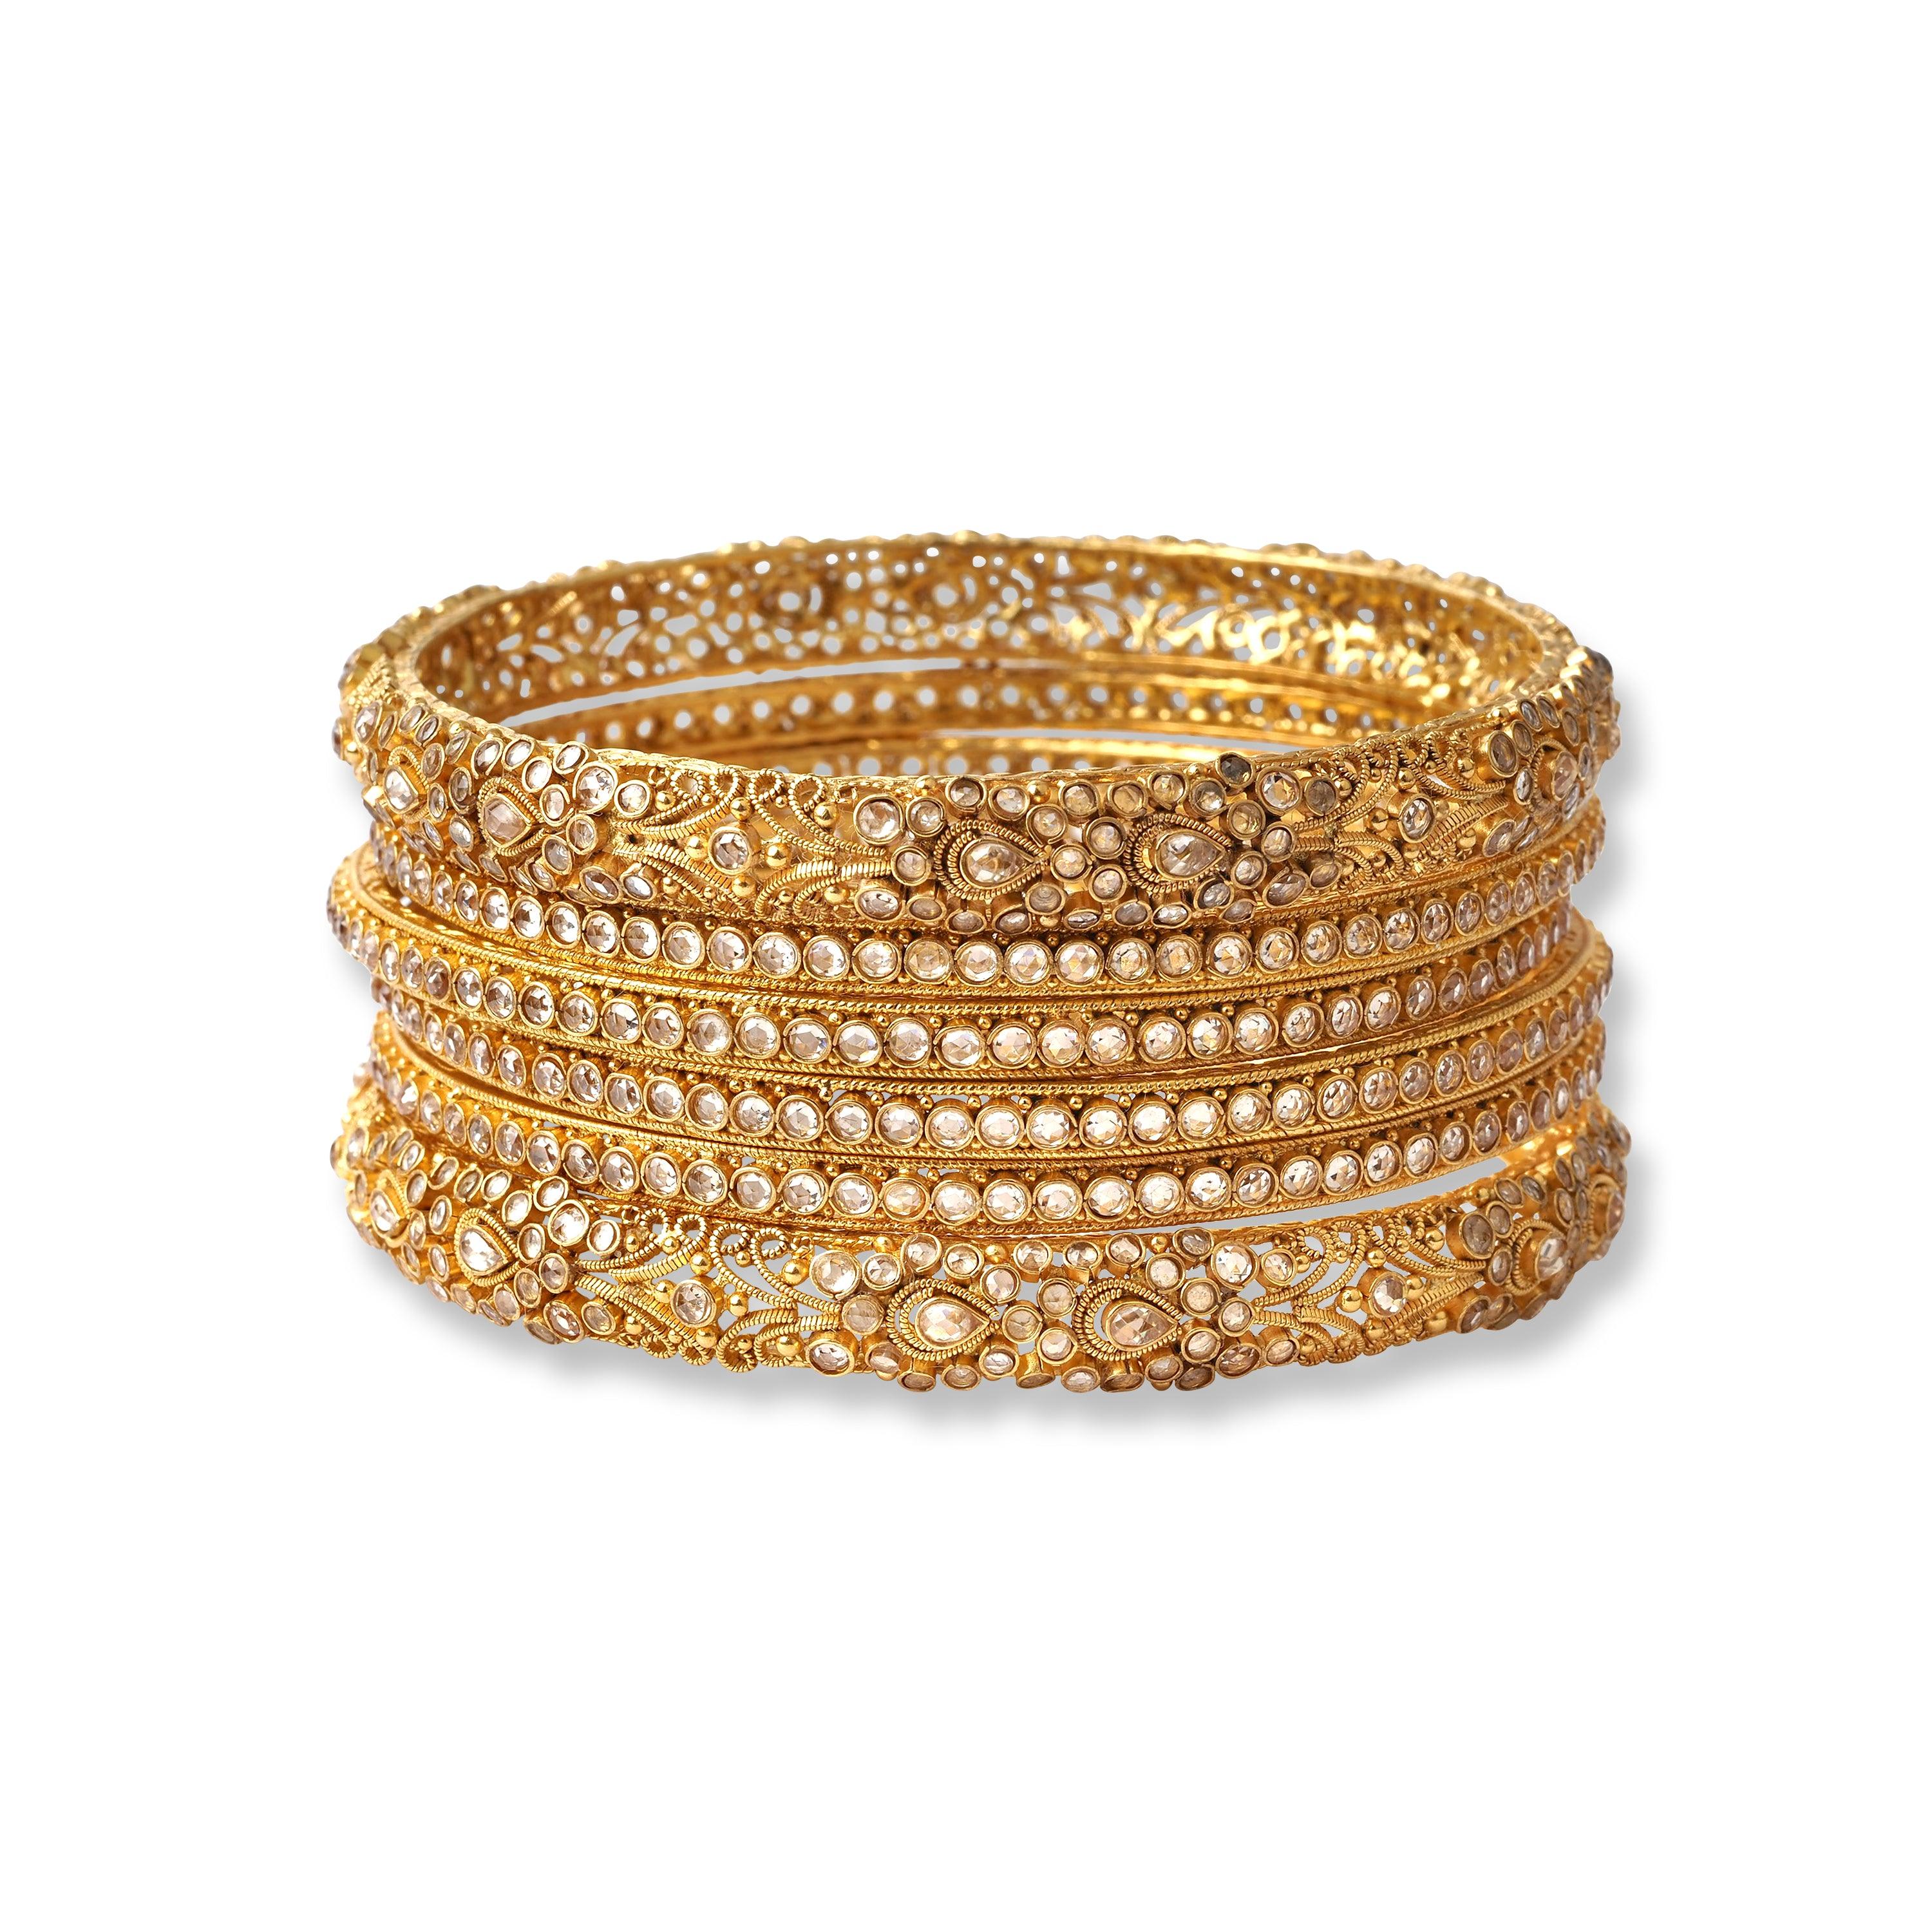 22ct Gold Antiquated Look Bangles with Comfort Fit (111.6g) B-8280 - Minar Jewellers